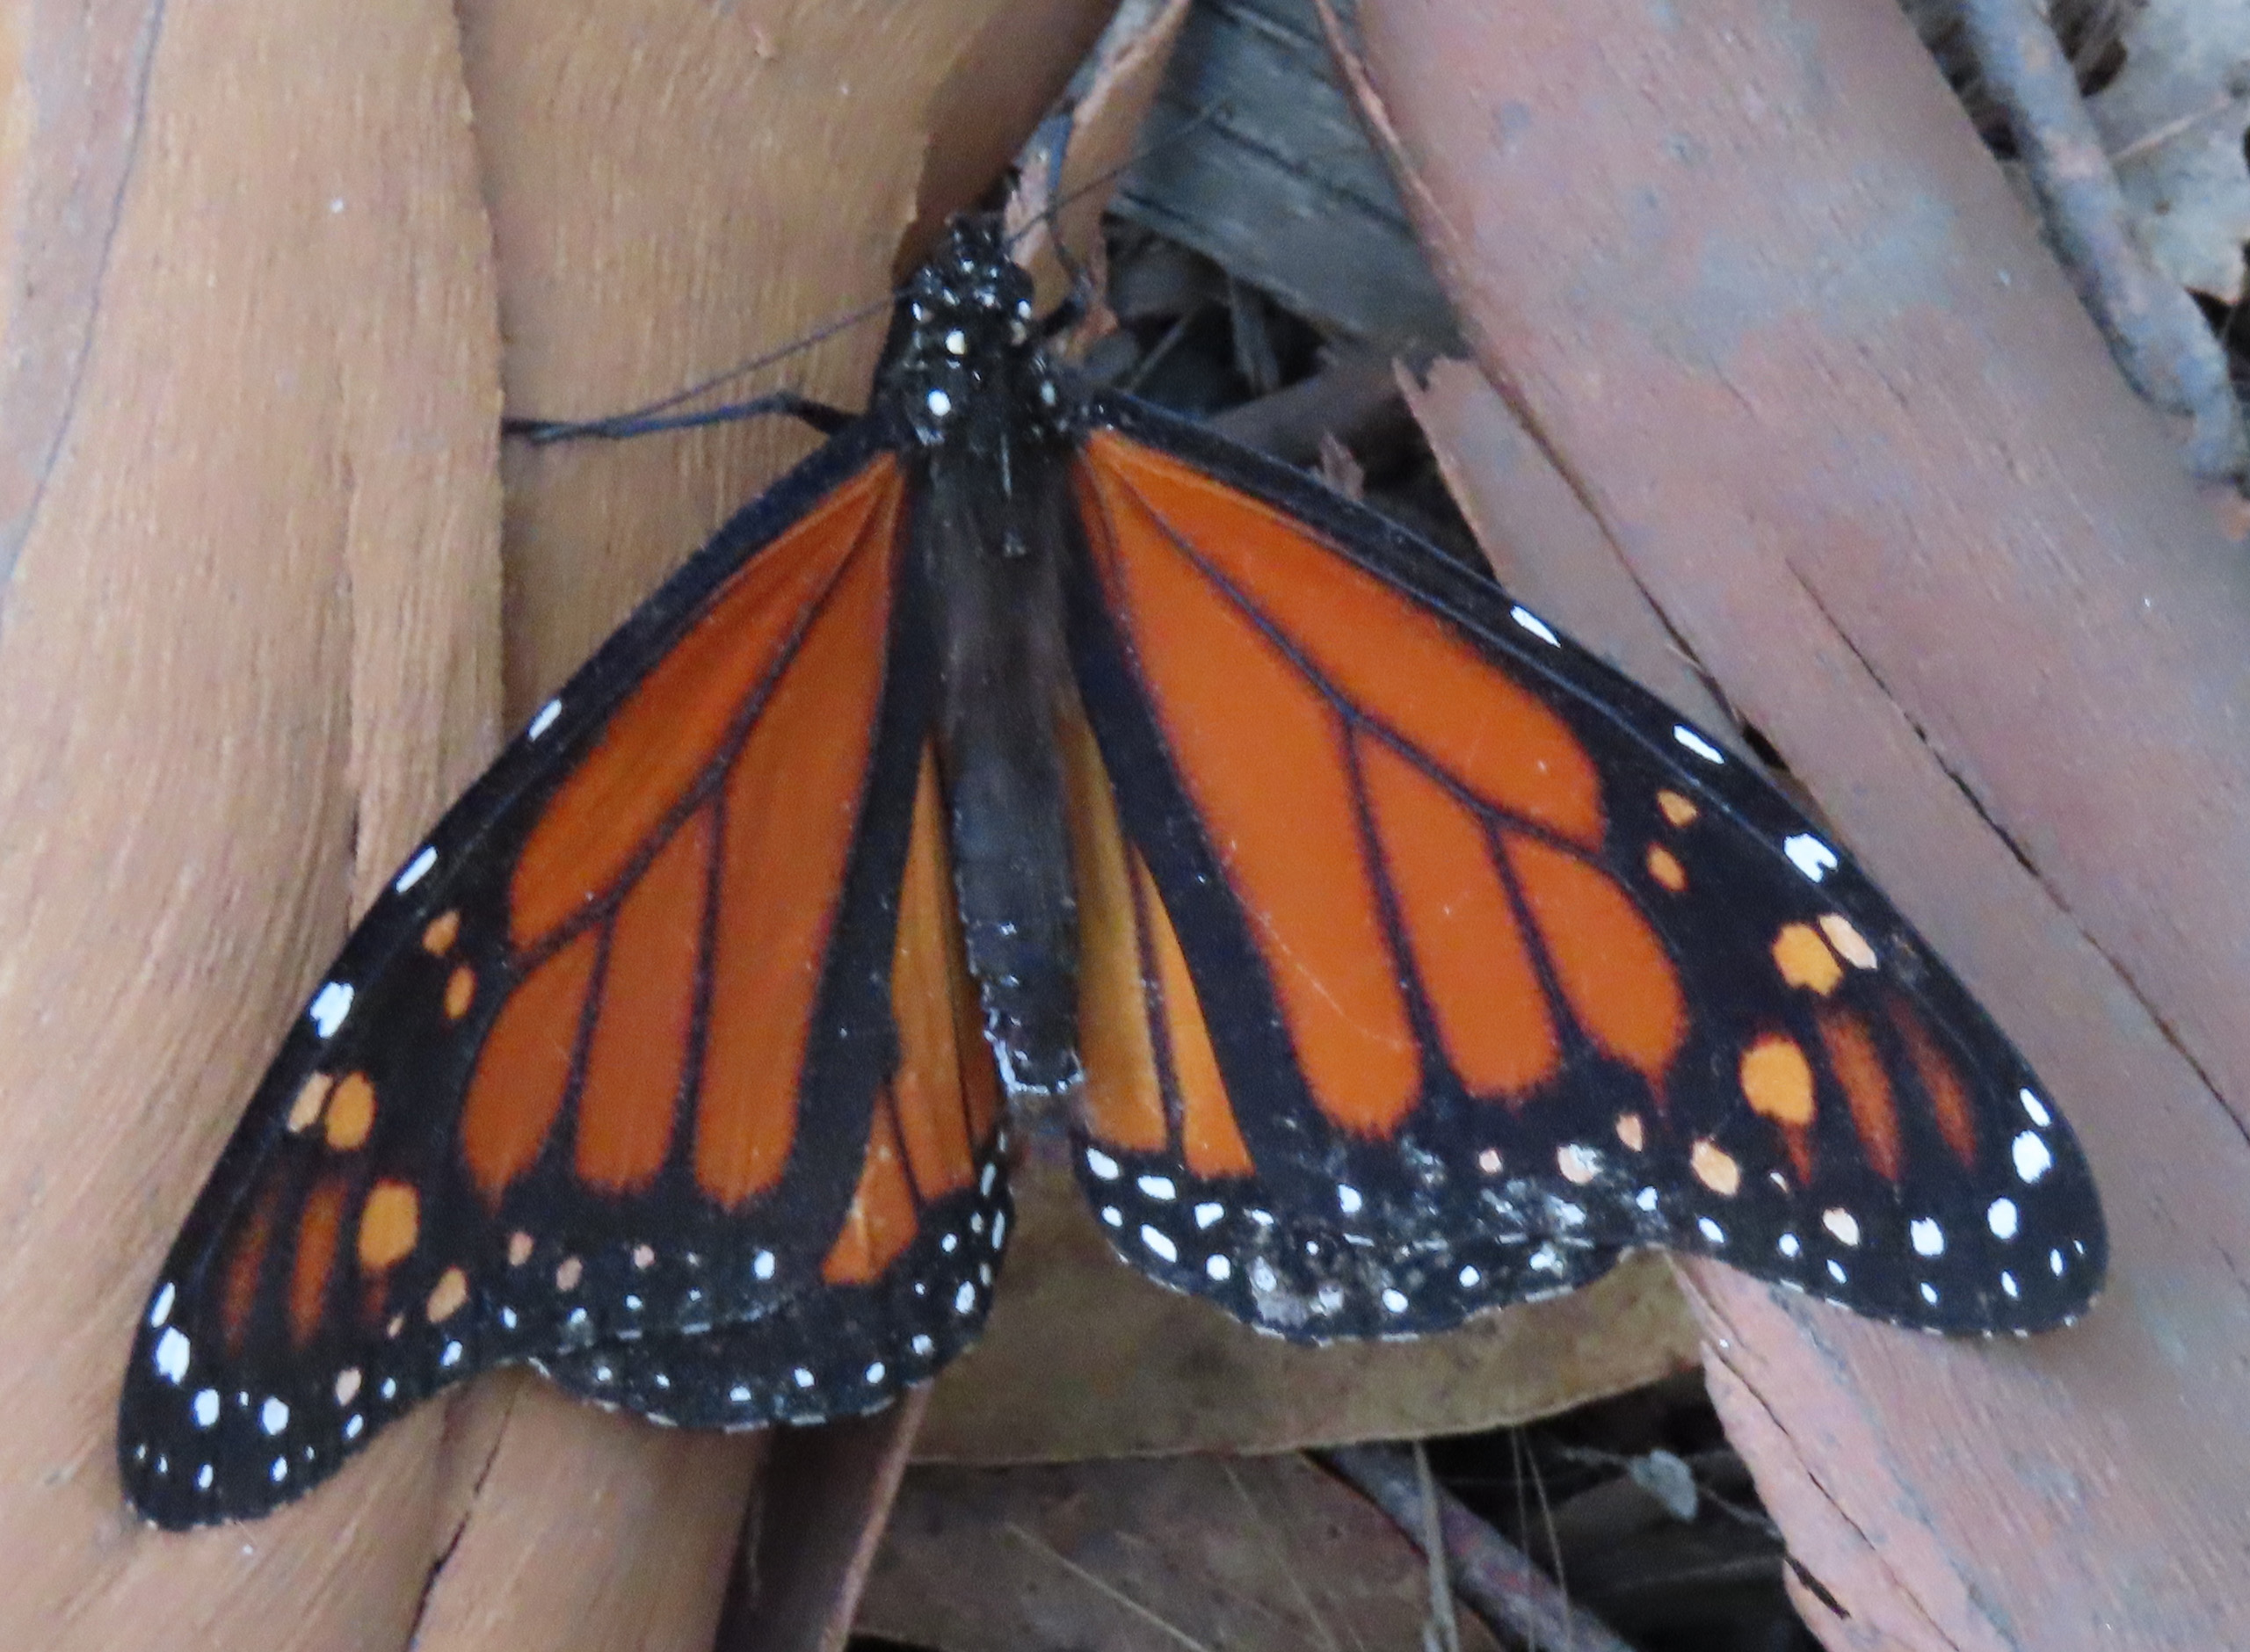 Christian Growth: Consider the Monarch